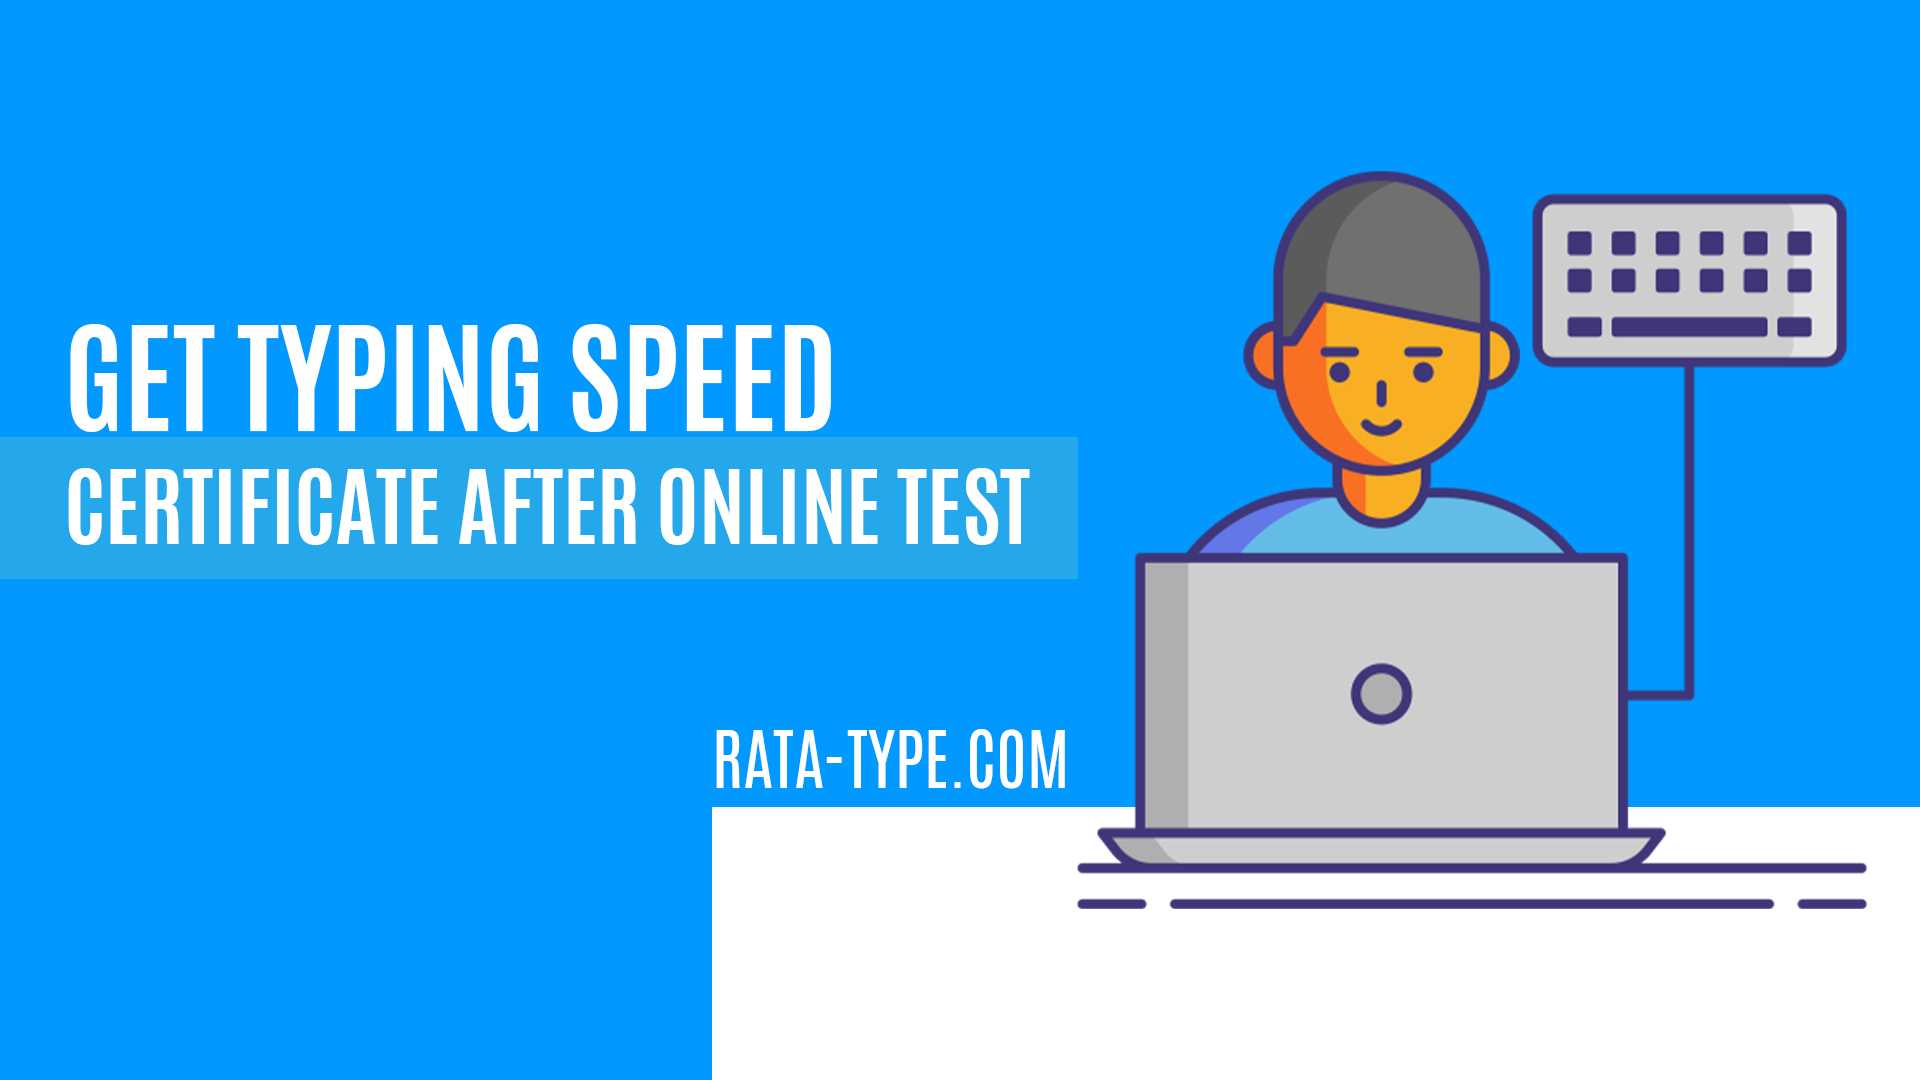 Get Typing Speed Certificate After Online Test